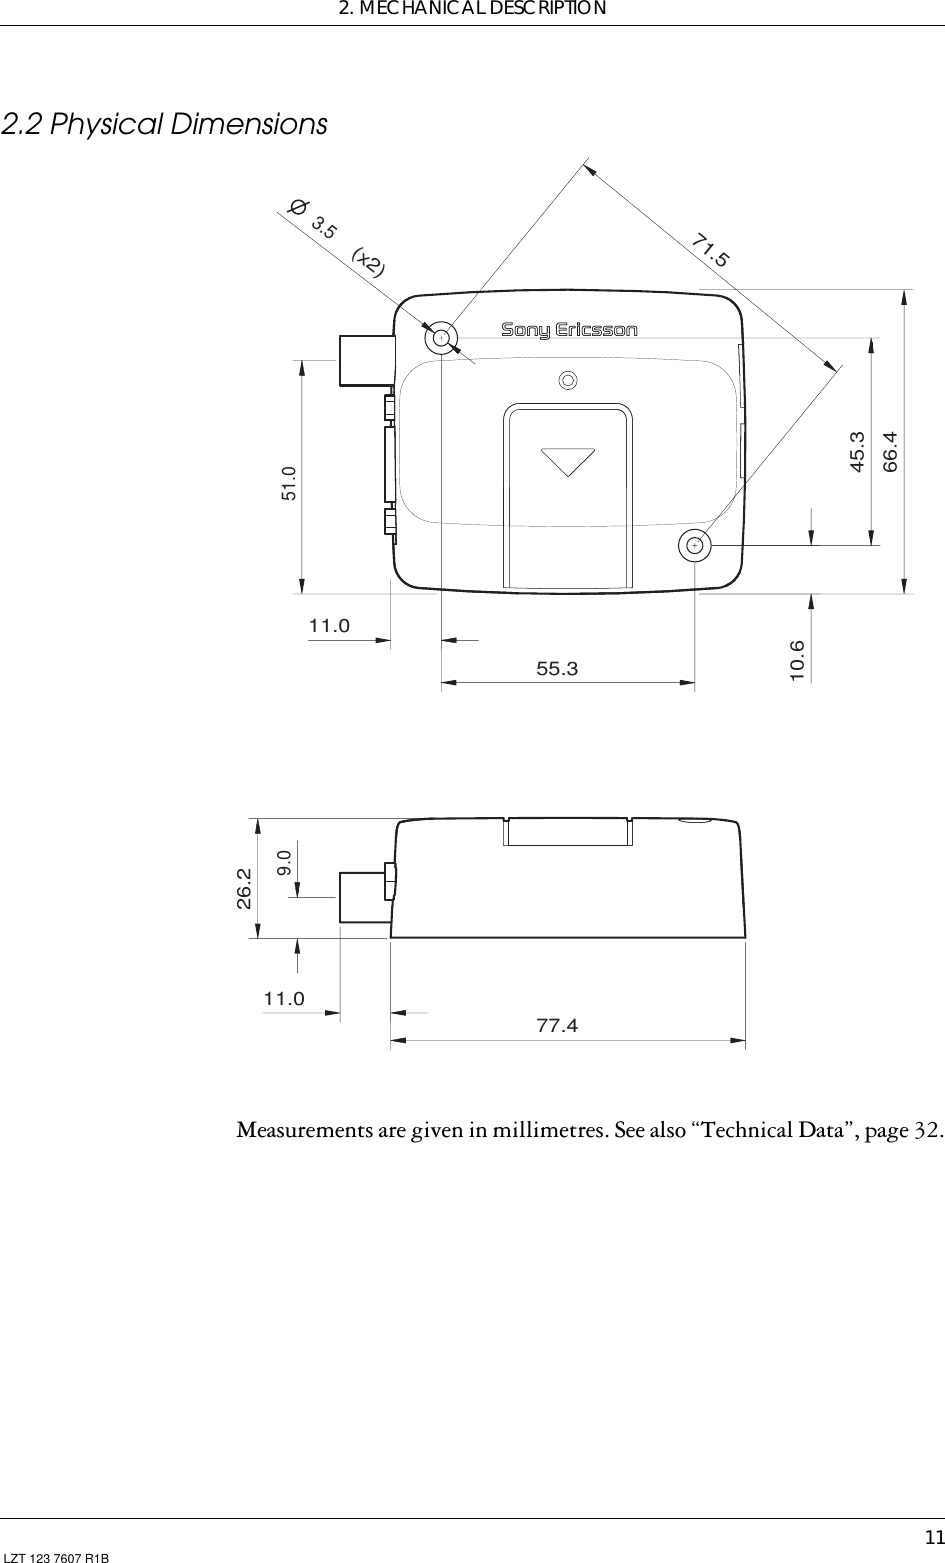 2. MECHANICAL DESCRIPTION11 LZT 123 7607 R1B2.2 Physical DimensionsMeasurements are given in millimetres. See also “Technical Data”, page 32.71.566.477.426.211.055.345.310.611.09.051.0(x2)3.5